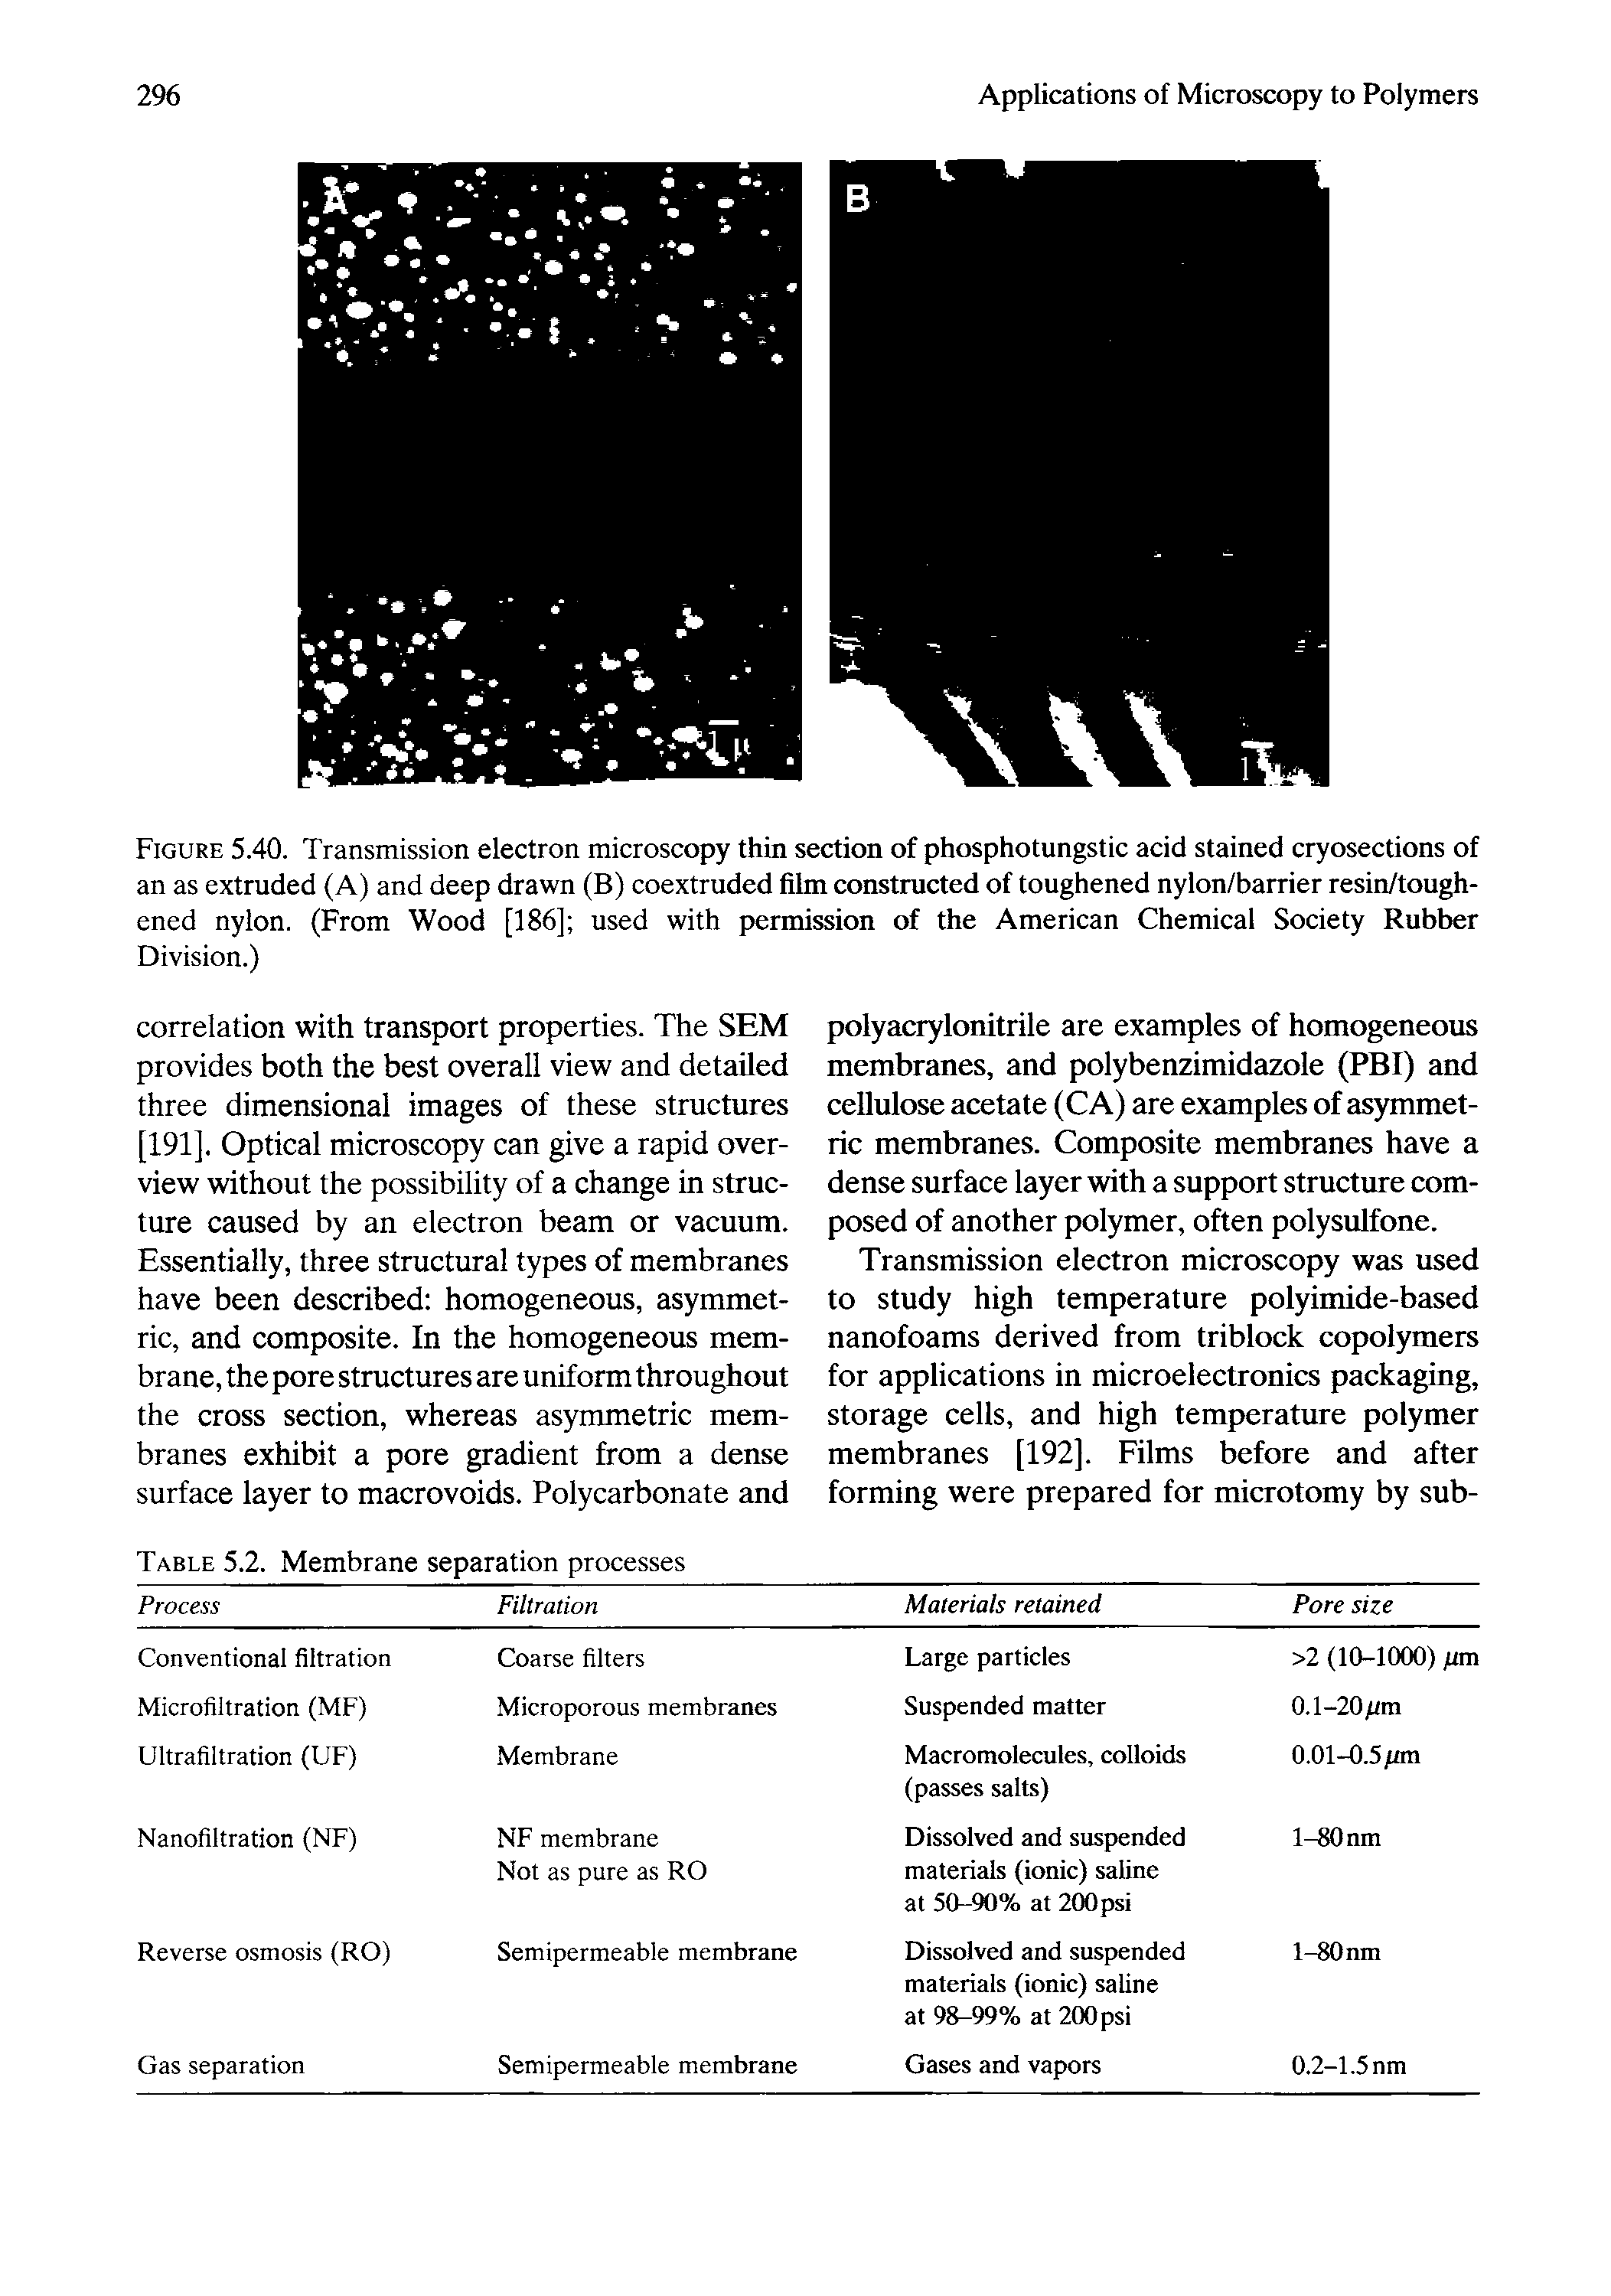 Figure 5.40. Transmission electron microscopy thin section of phosphotungstic acid stained cryosections of an as extruded (A) and deep drawn (B) coextruded film constructed of toughened nylon/barrier resin/tough-ened nylon. (From Wood [186] used with permission of the American Chemical Society Rubber Division.)...